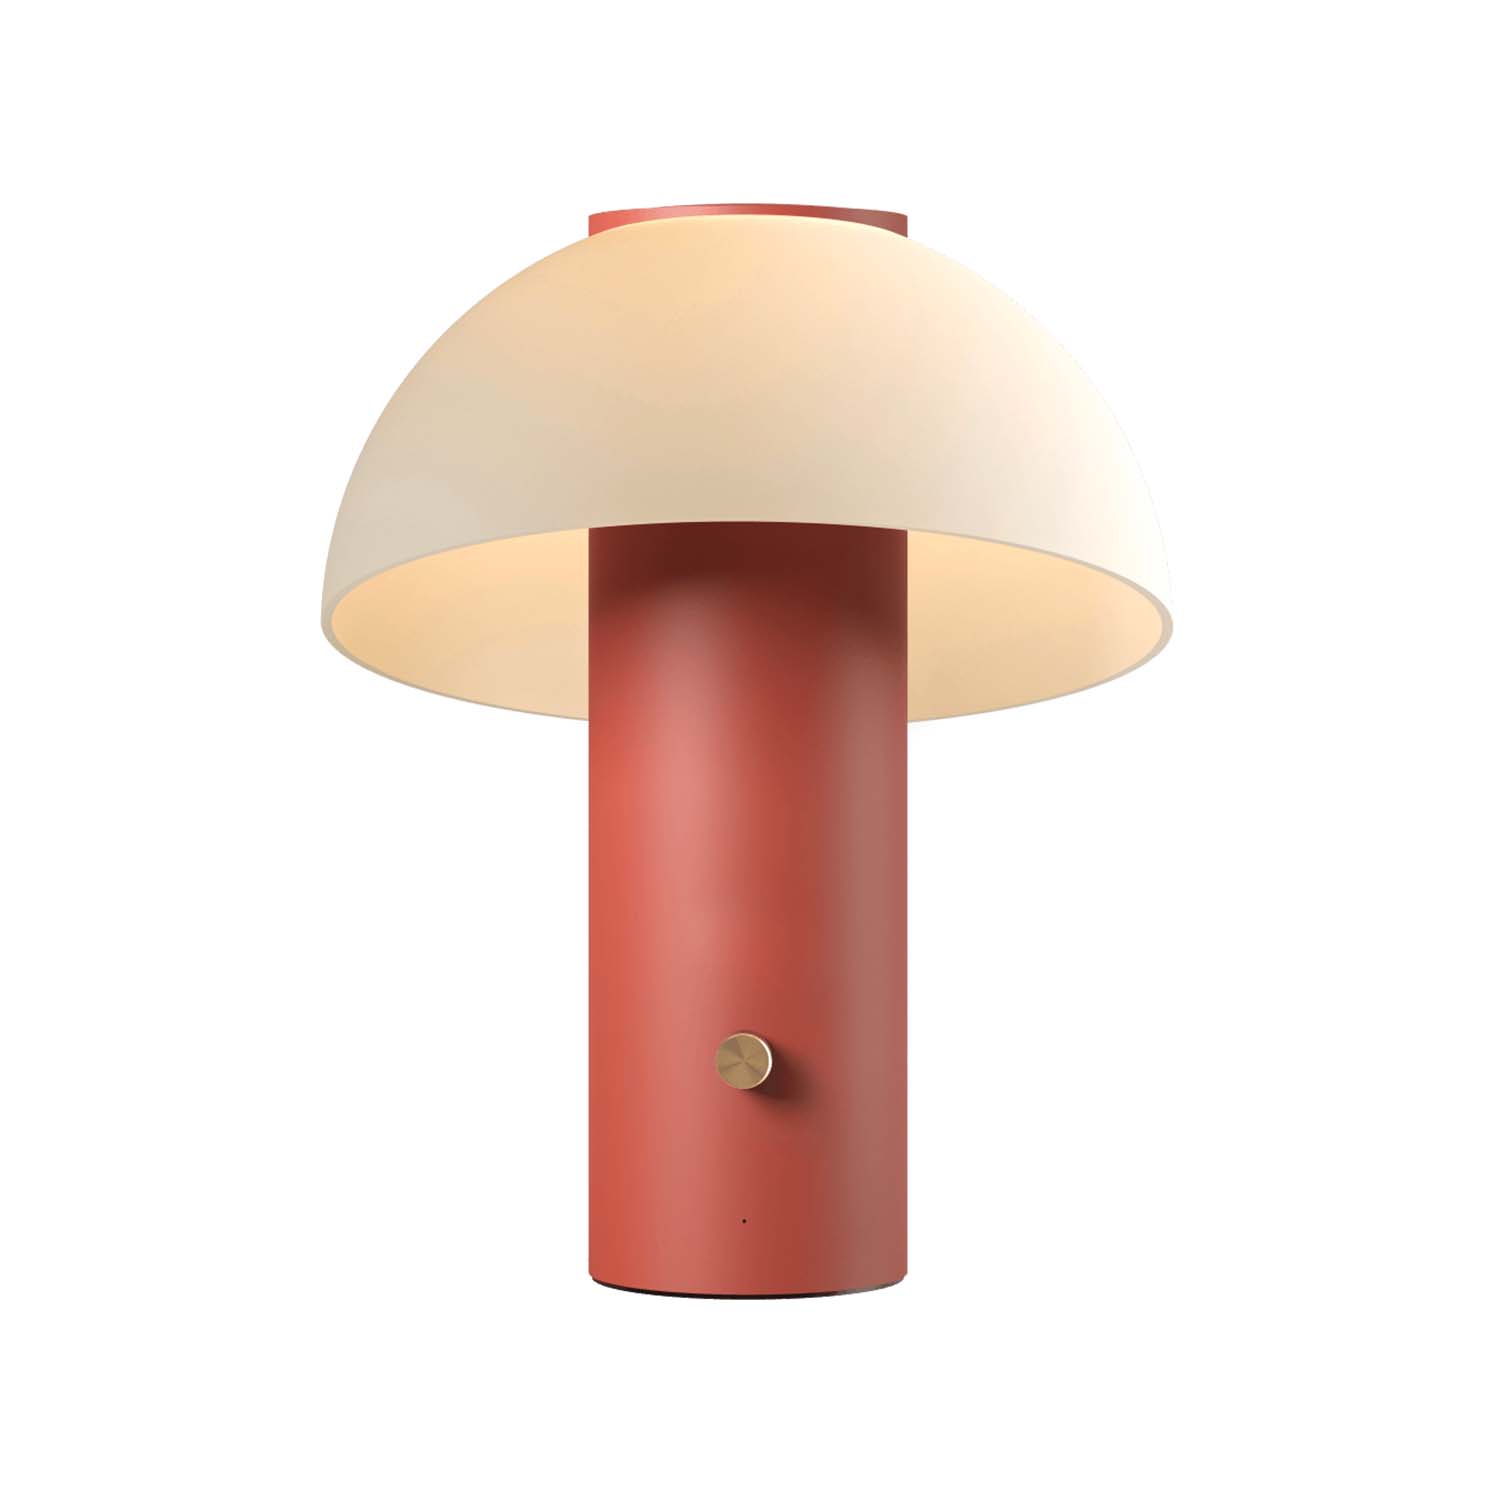 PICCOLO - Dimmable designer connected lamp